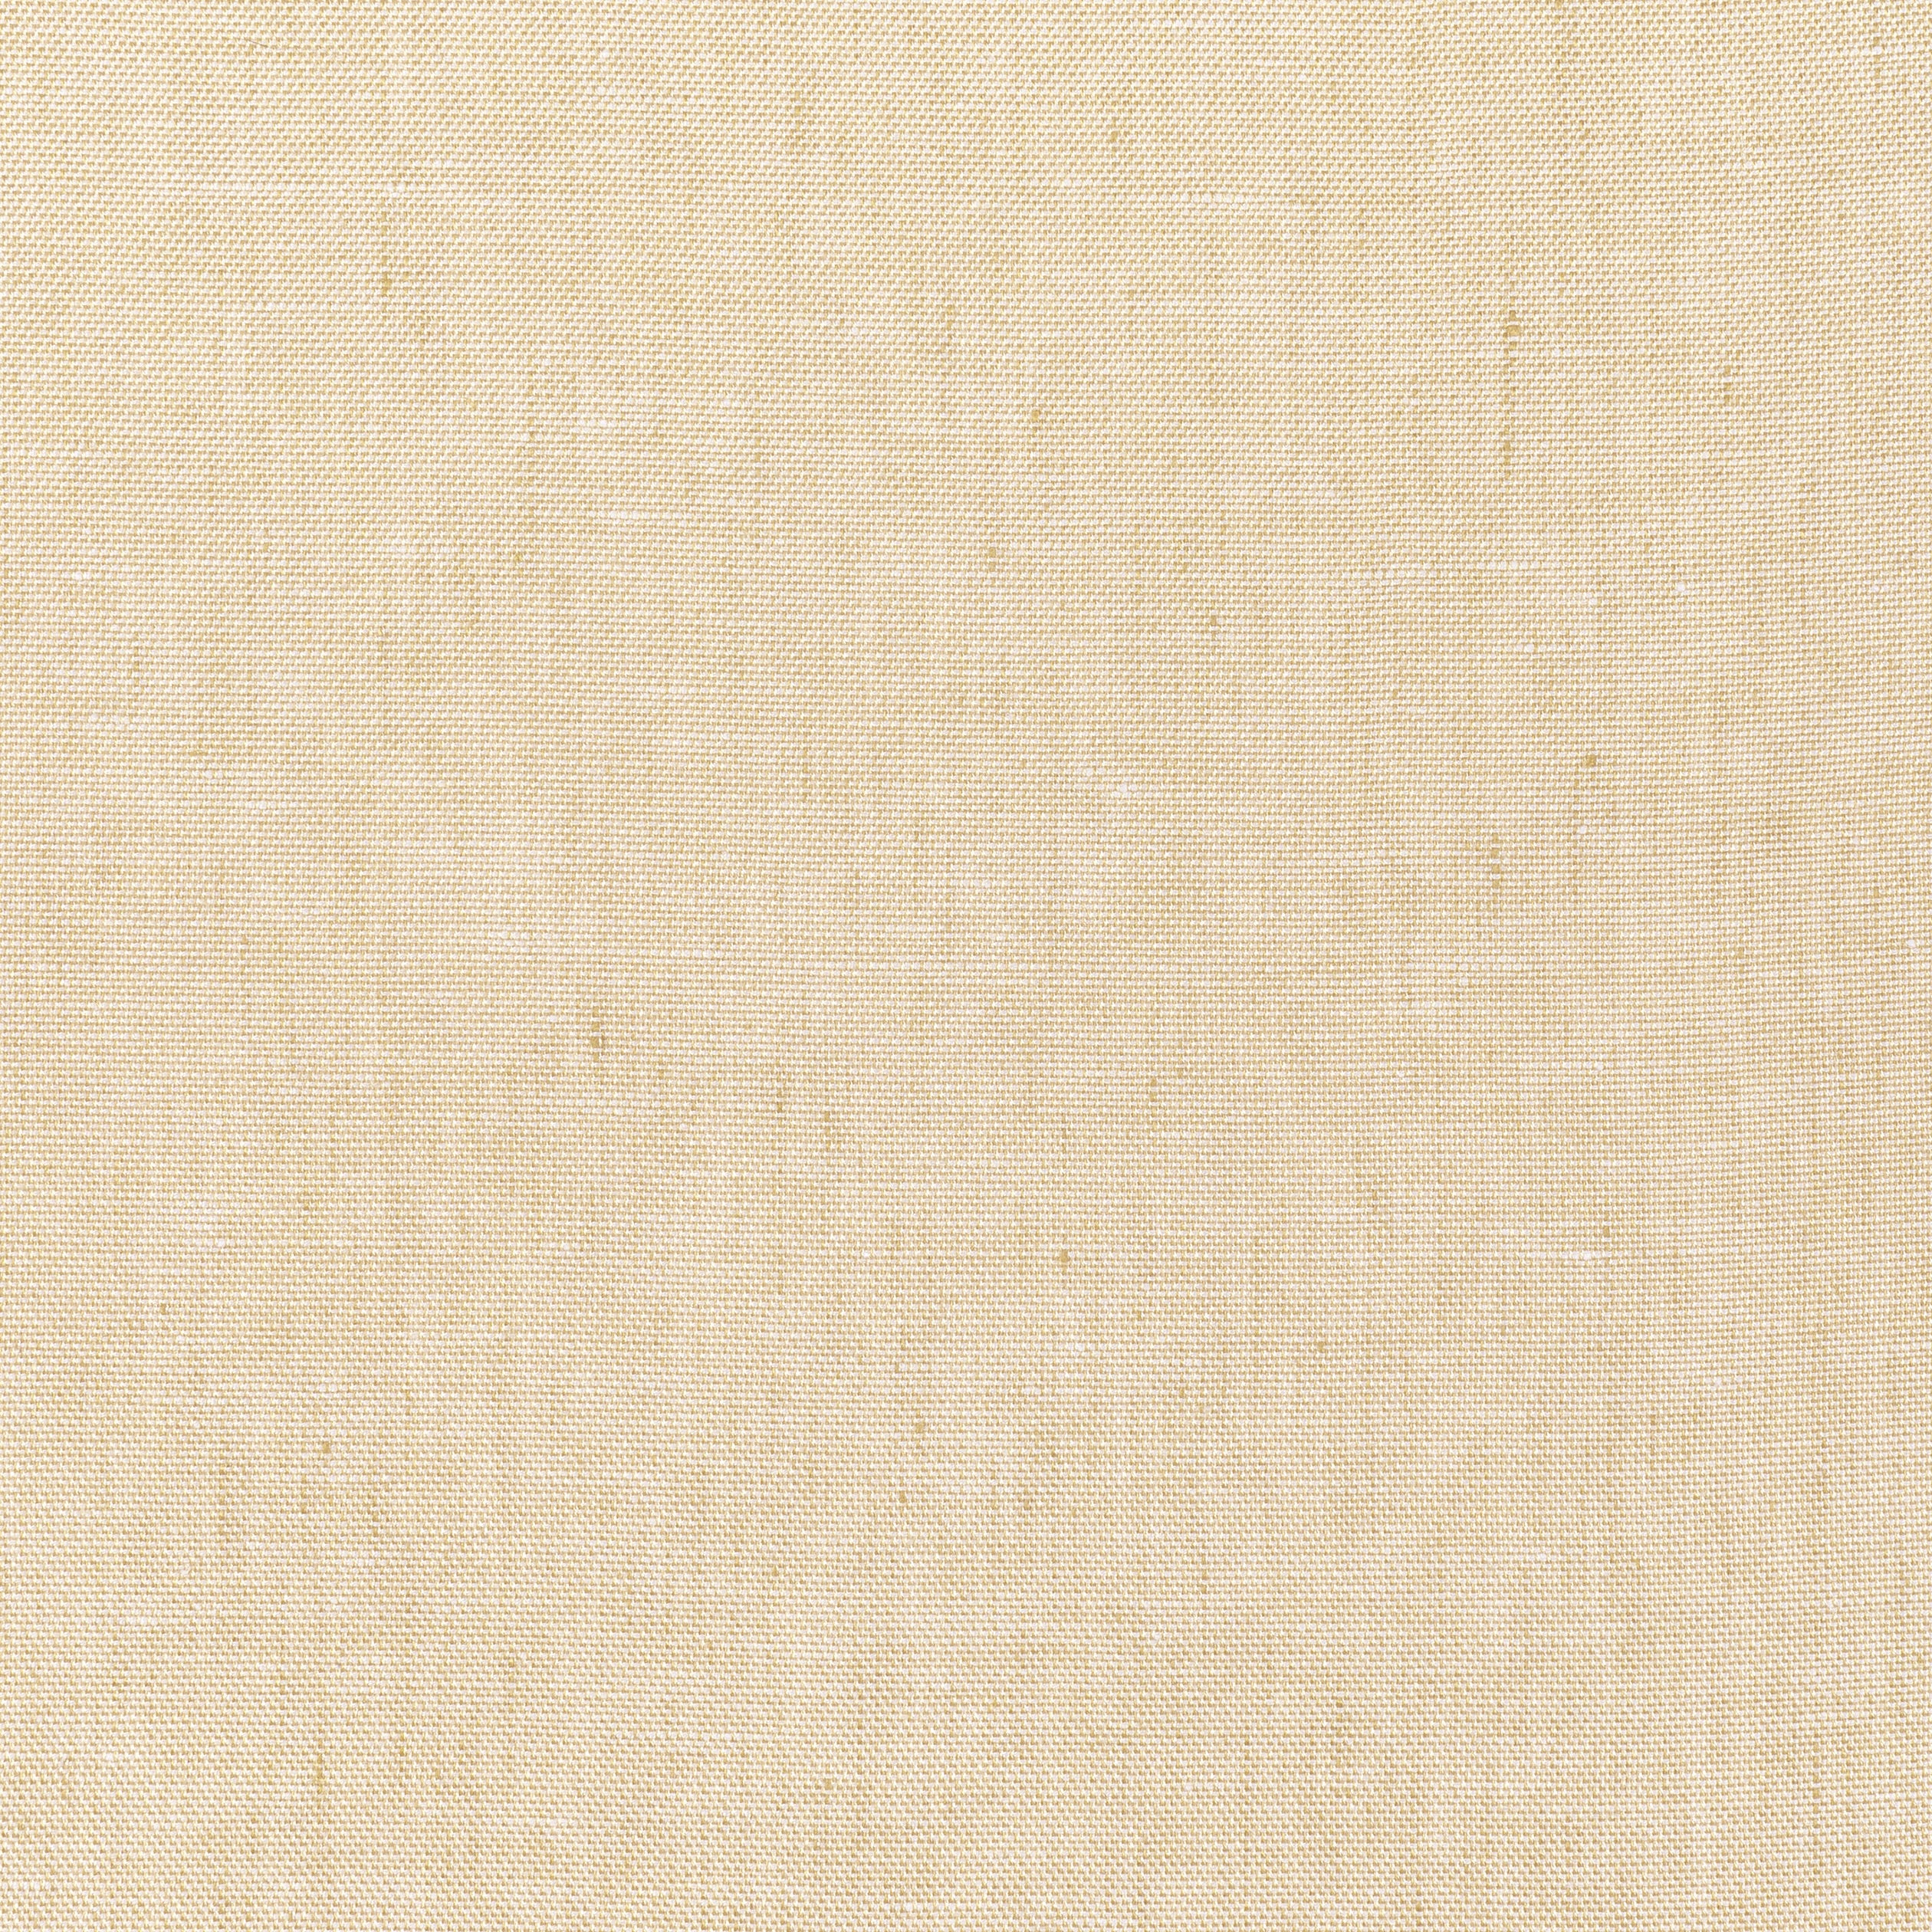 Skye Linen fabric in sahara color - pattern number FWW7621 - by Thibaut in the Palisades collection